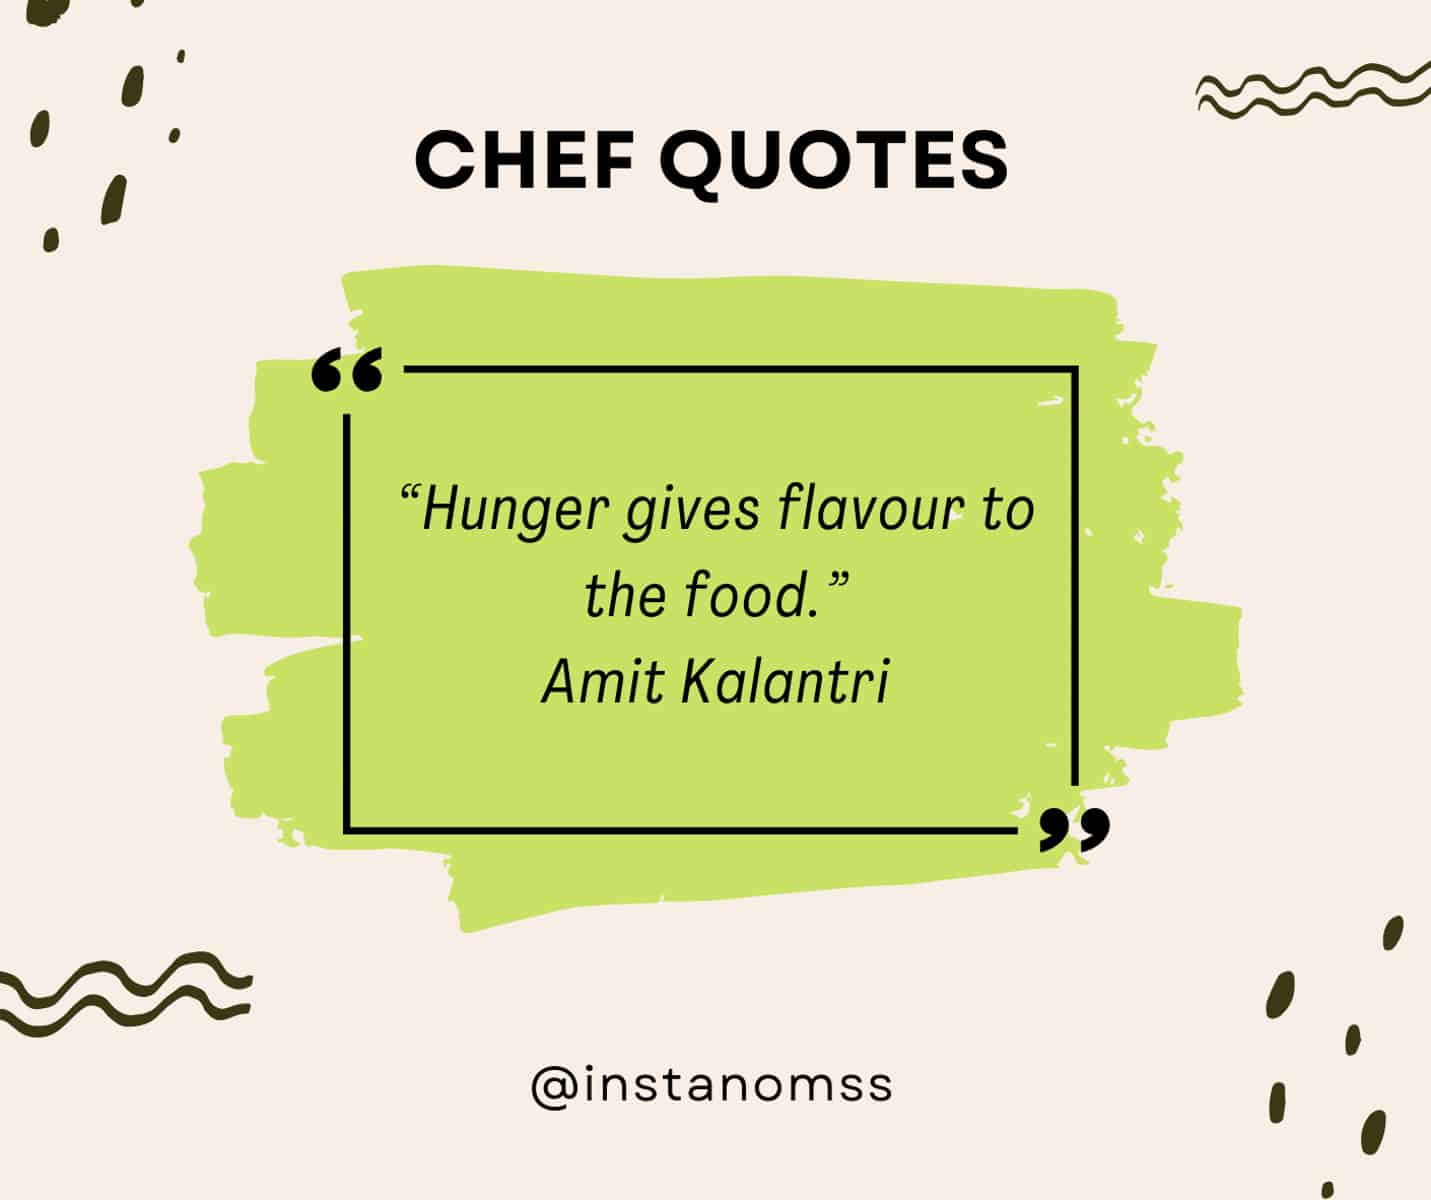 “Hunger gives flavour to the food.” Amit Kalantri